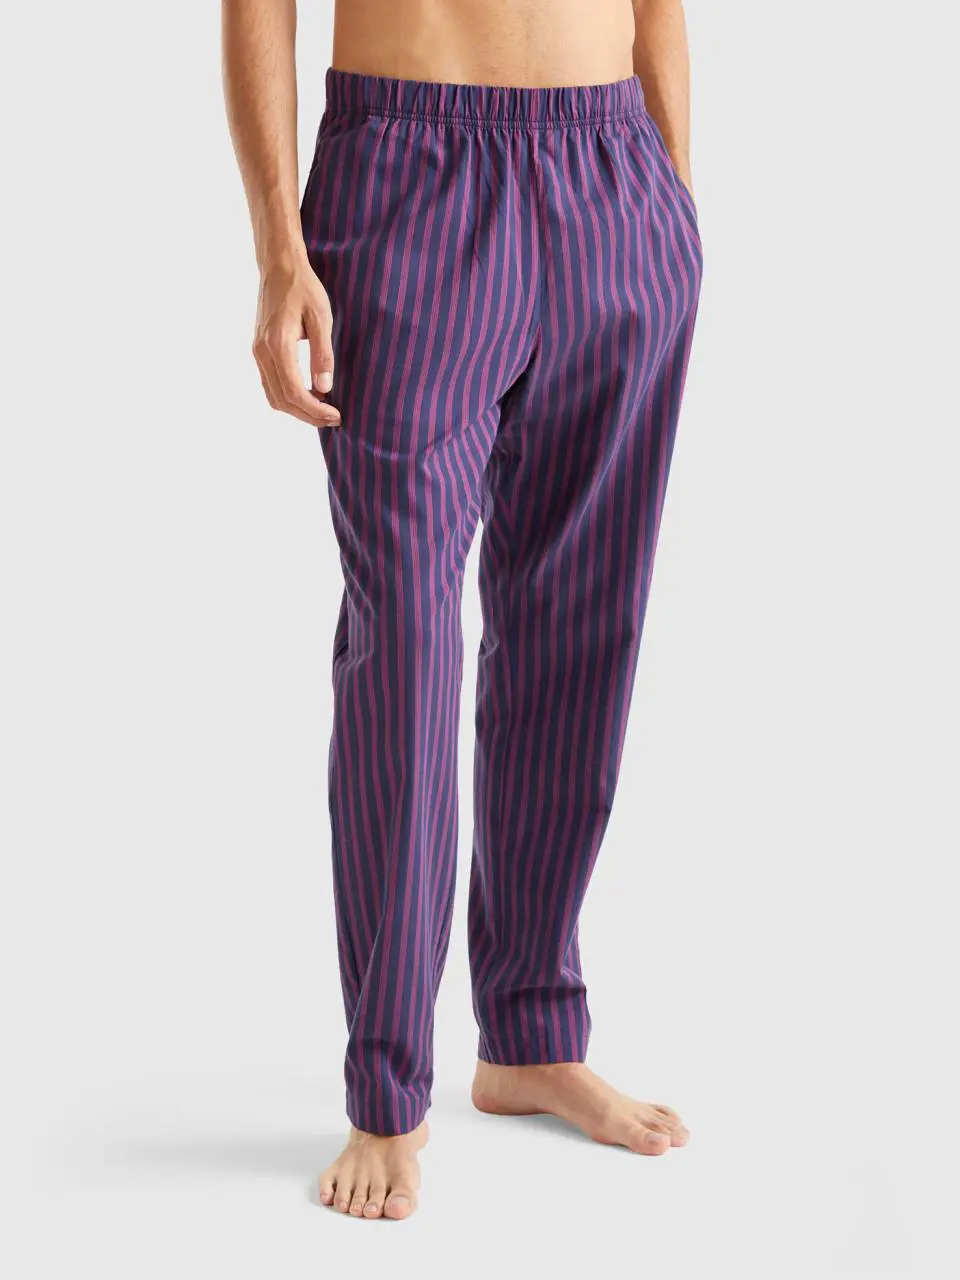 Benetton striped trousers. 1